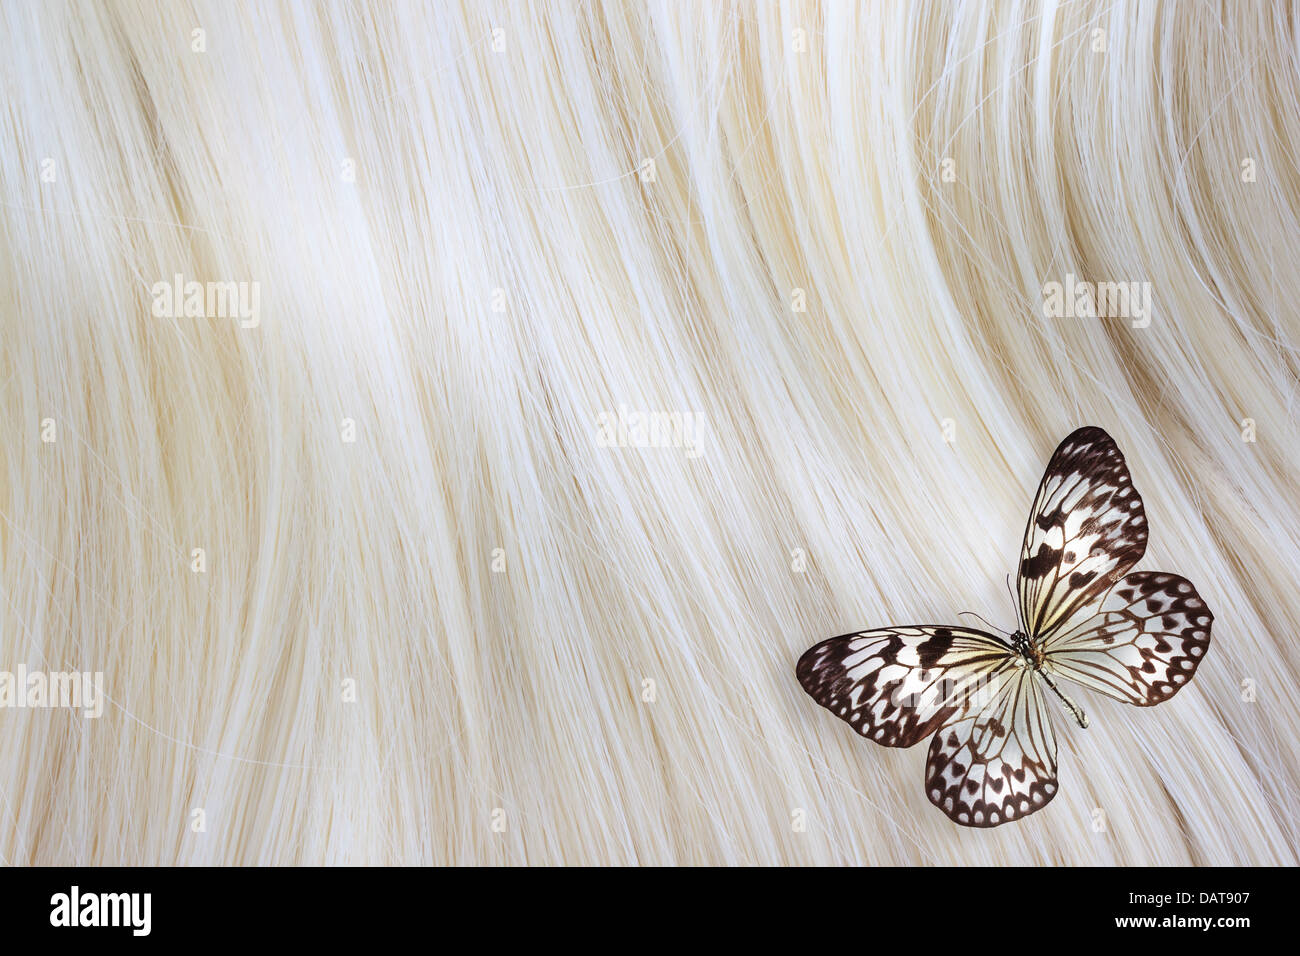 Healthy blond hair with a Paper Kite butterfly - close up image Stock Photo